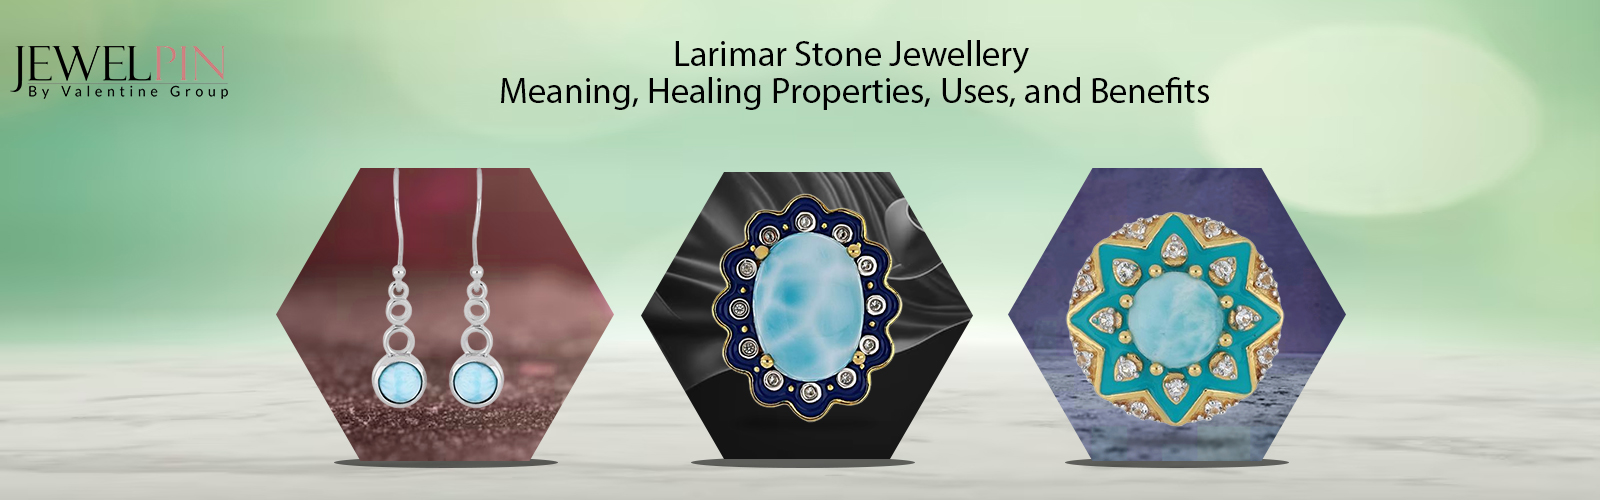 JewelP - Blue Larimar Stone Jewellery Meaning Healing Properties Uses and Benefits